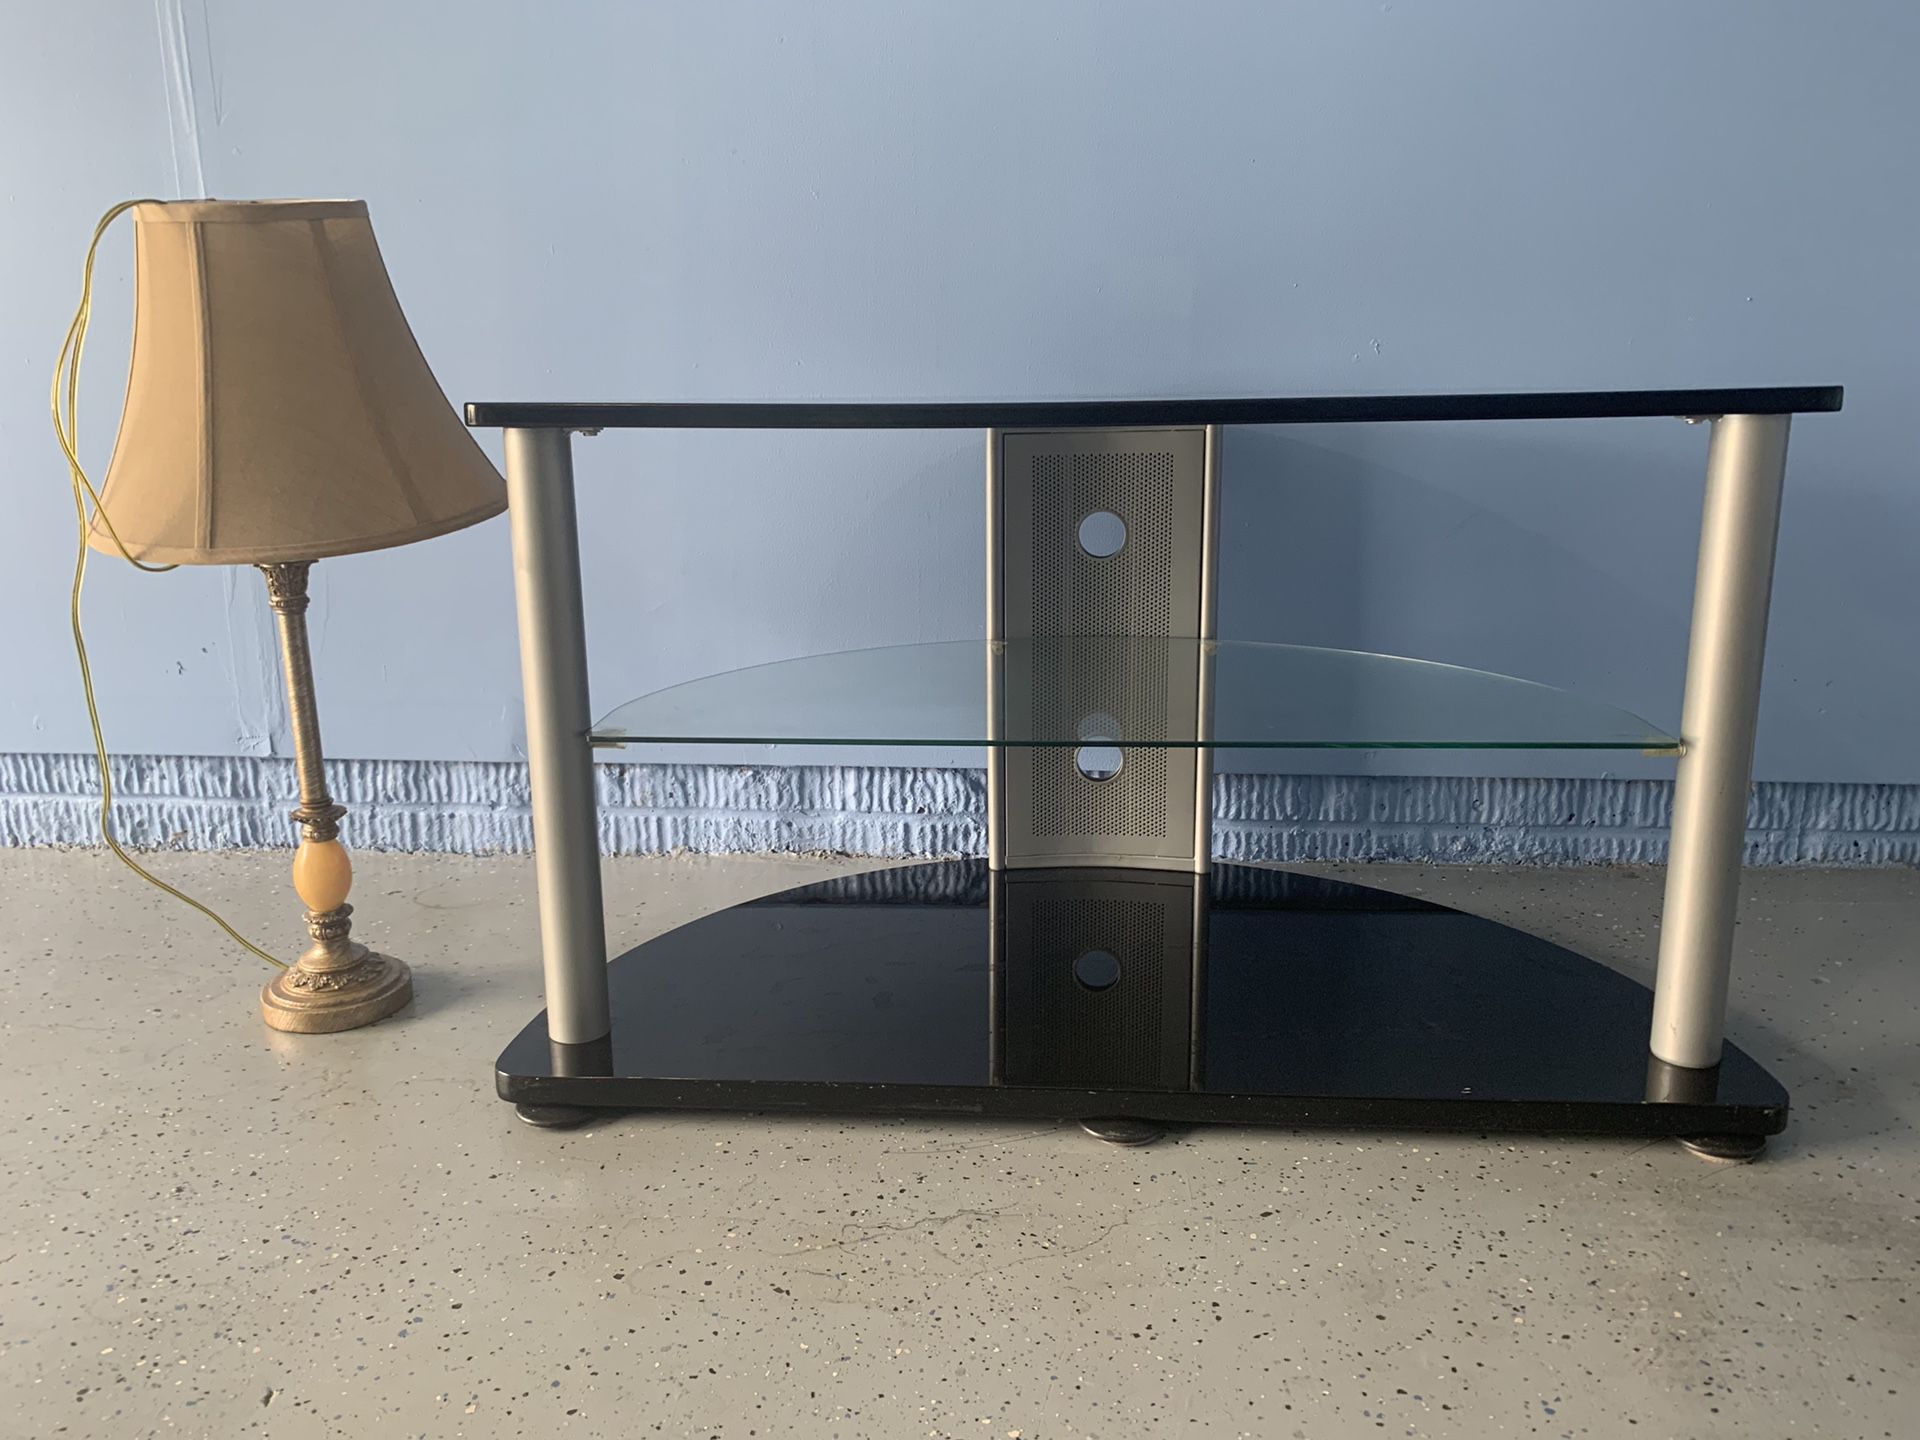 Tv stand and Night lamp